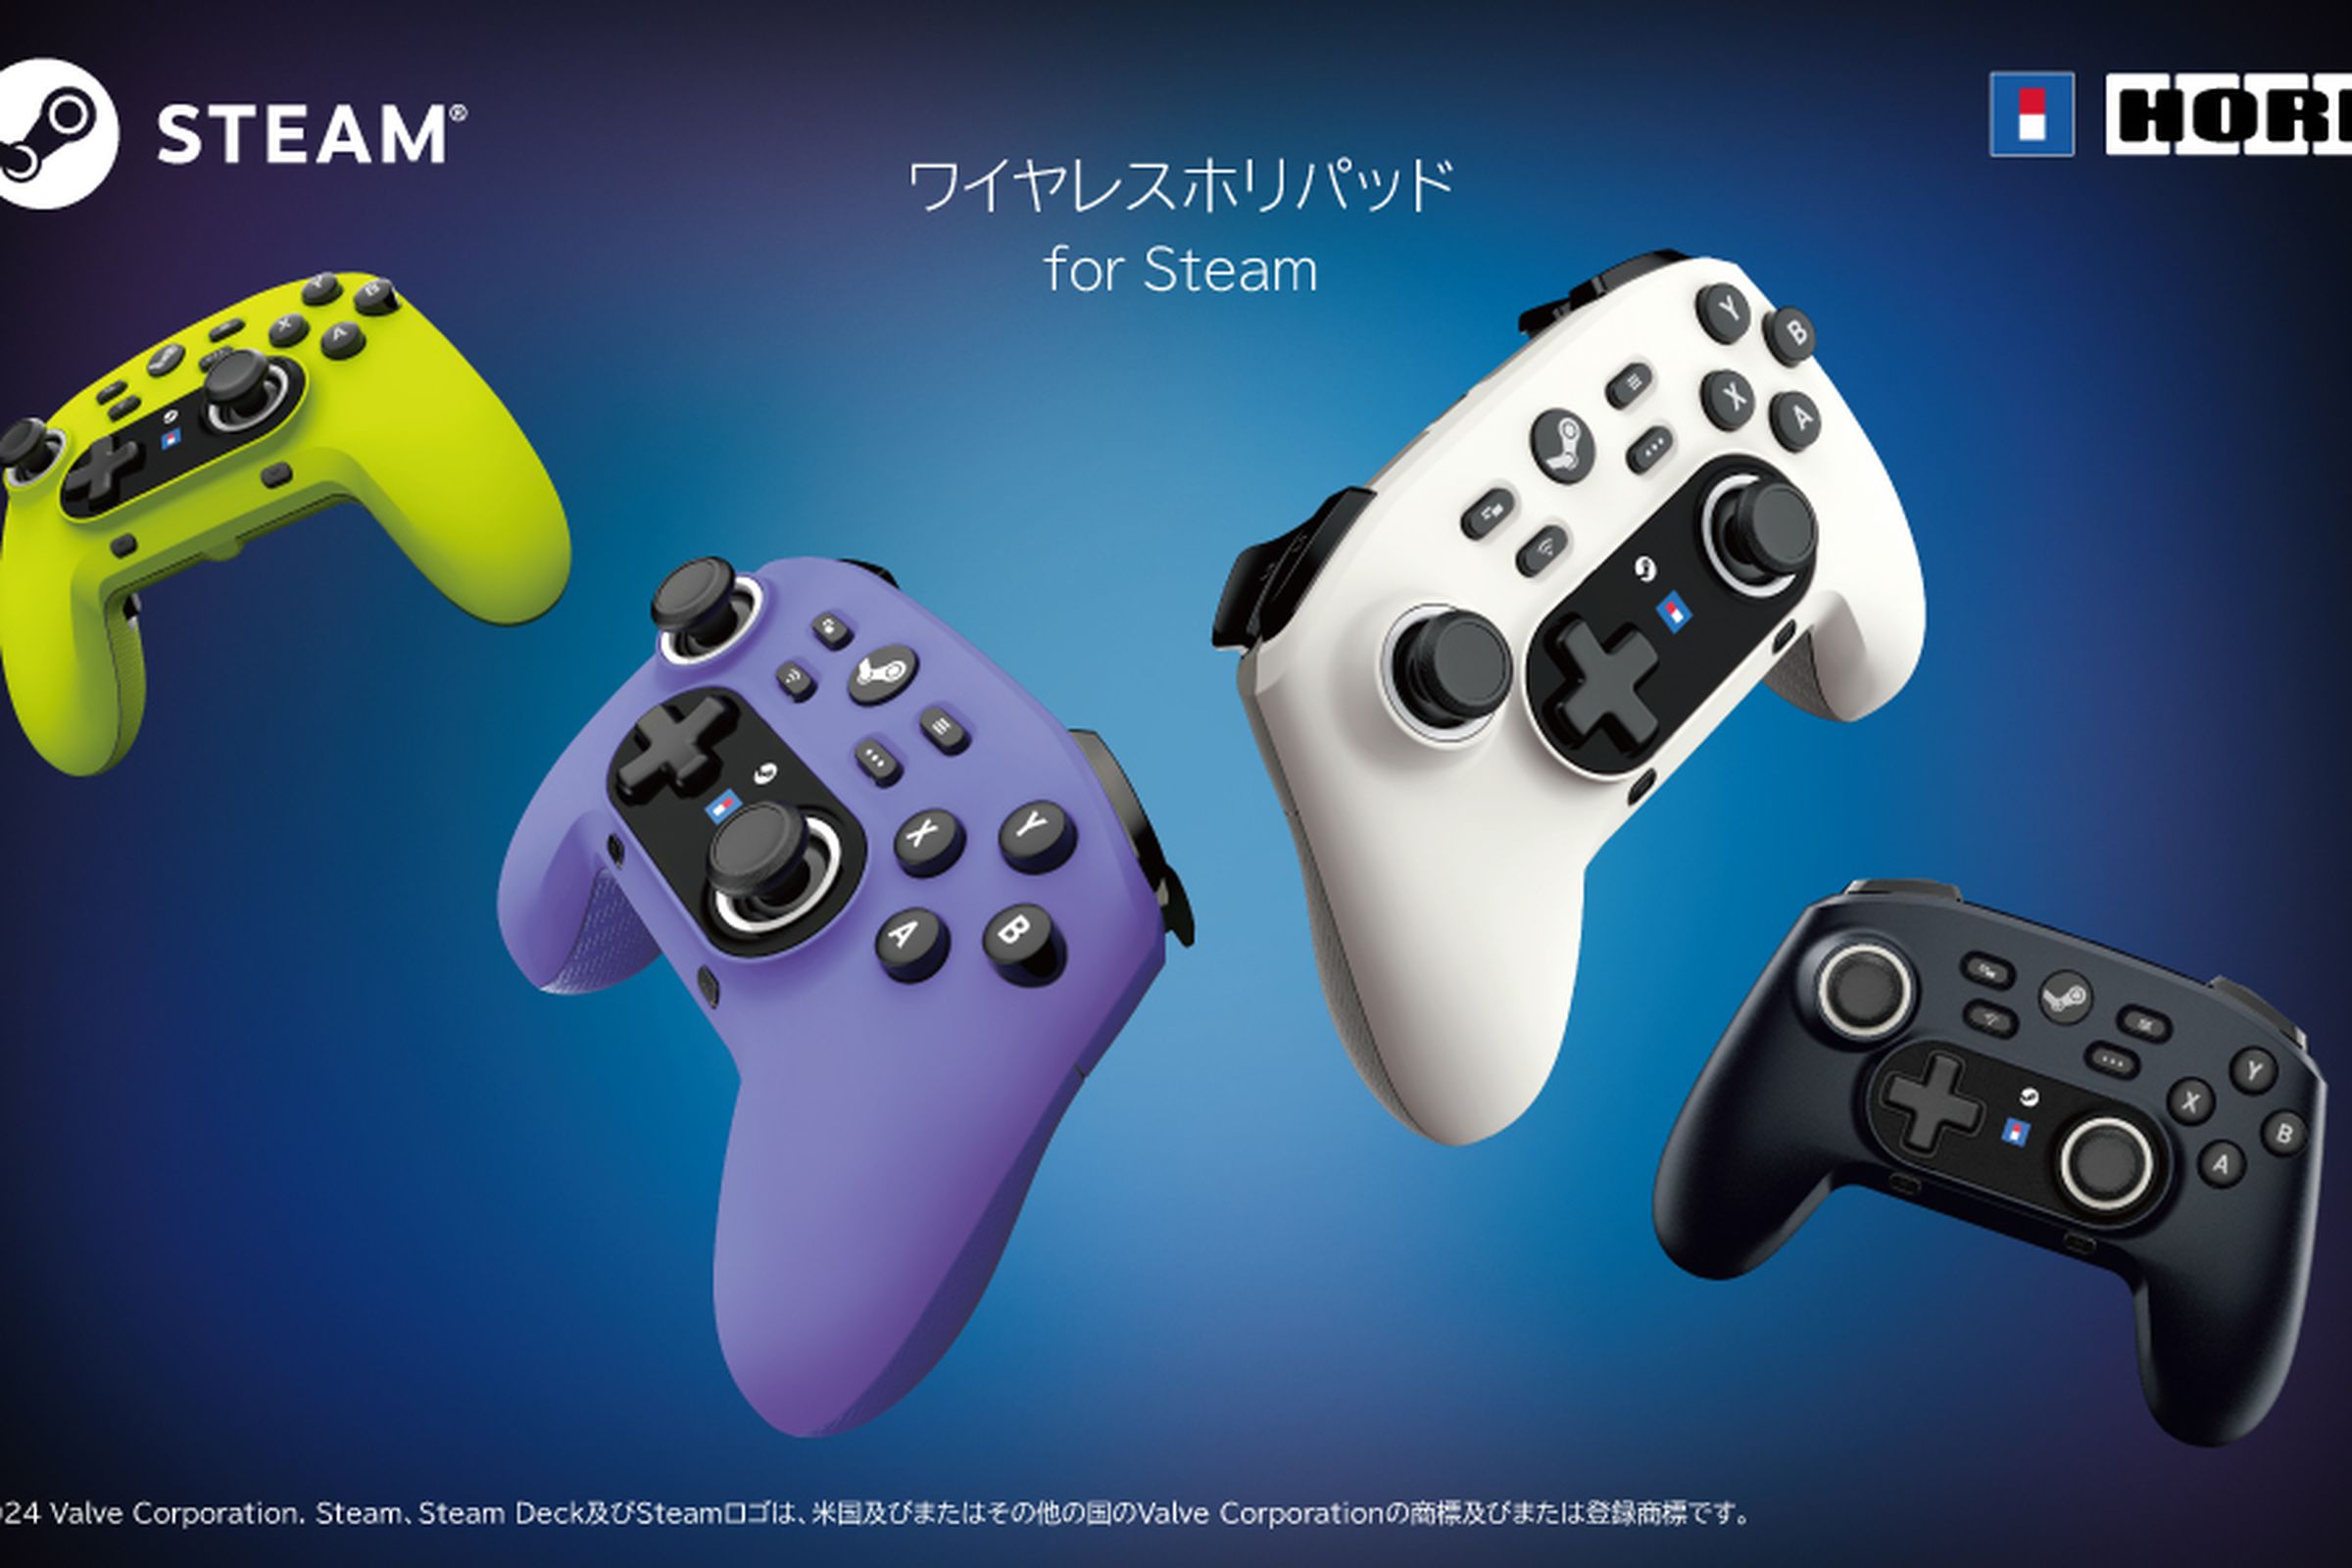 Four colors of the Wireless Horipad controller for Steam (yellow, violet, white, and black) against a blue background.